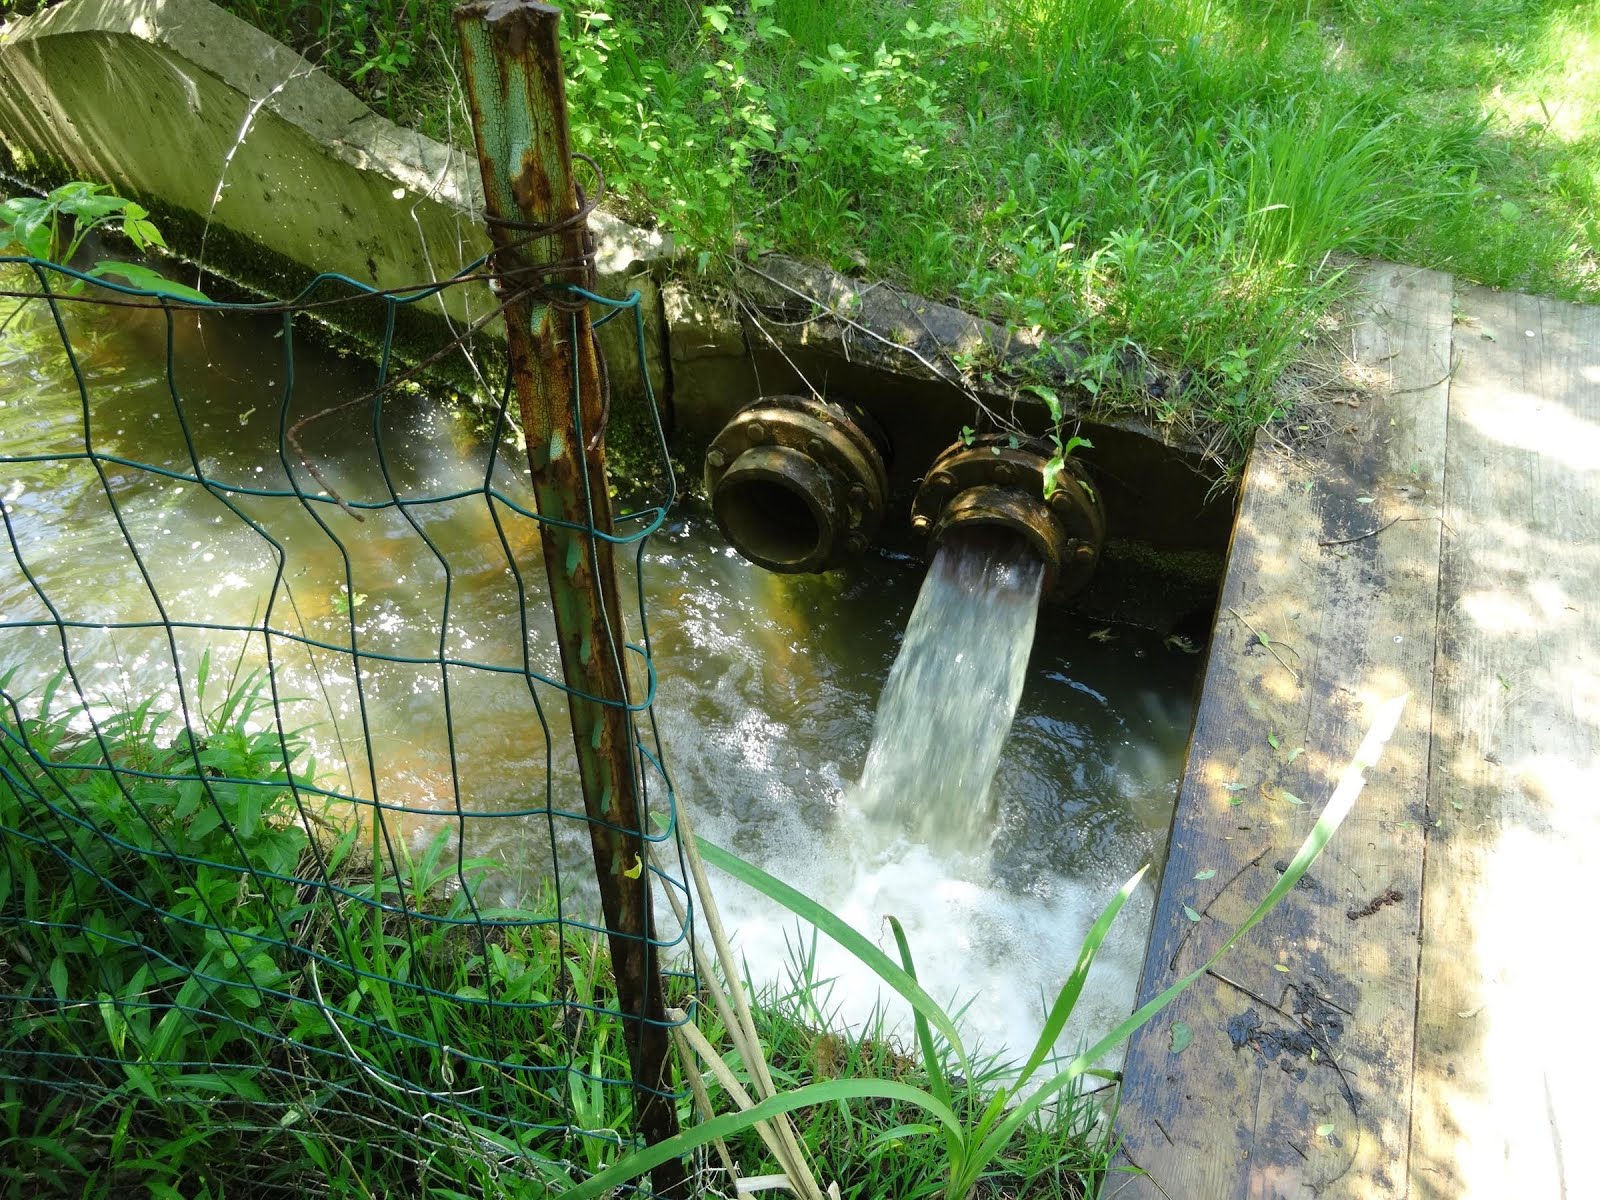 Water discharged into Honey Creek after treatment is allowed to contain dioxane up to 22 ppb